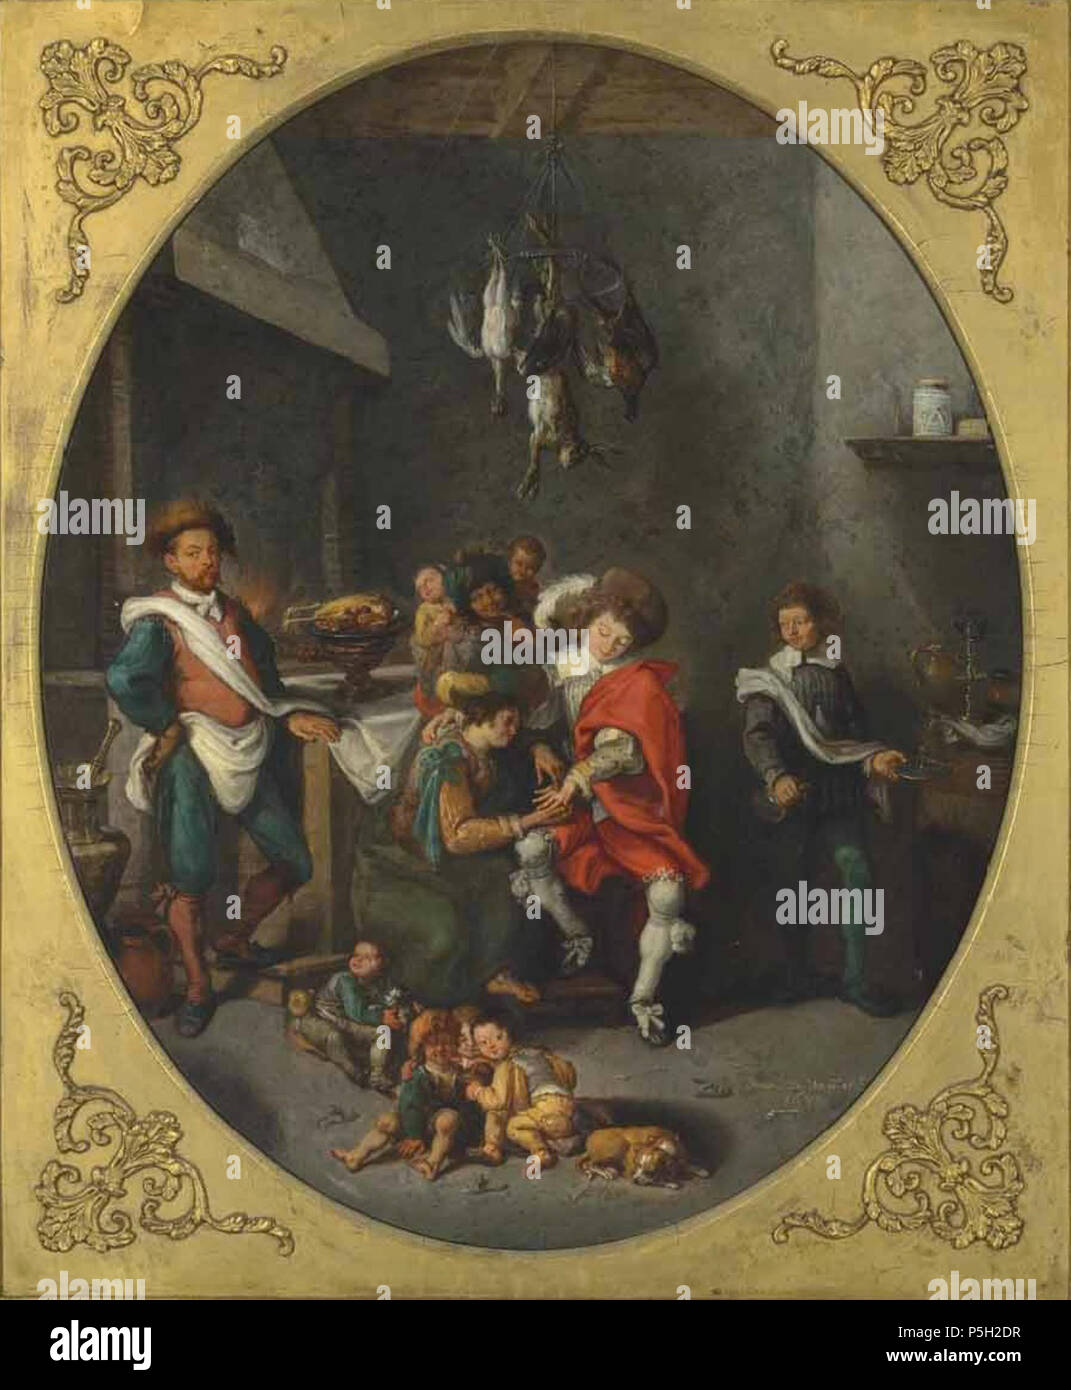 English: The interior of a kitchen with a fortune teller reading the palm of a finely dressed gentleman, with other figures and children;  1639. N/A 14 Simon de Vos - The interior of a kitchen with a fortune teller Stock Photo